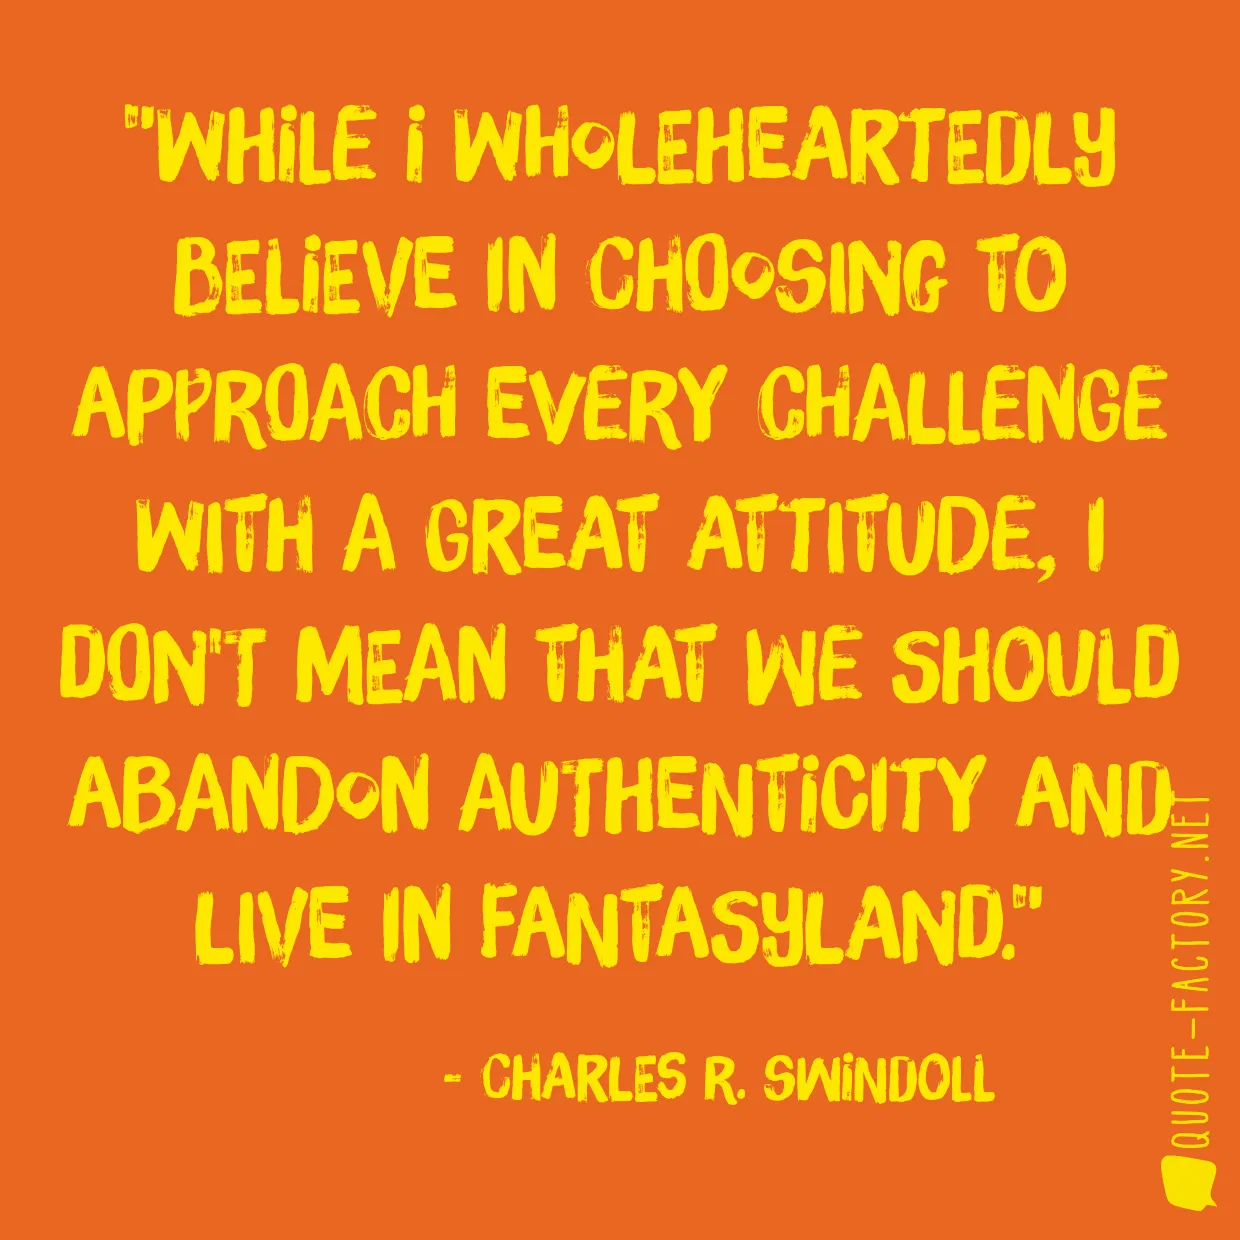 While I wholeheartedly believe in choosing to approach every challenge with a great attitude, I don't mean that we should abandon authenticity and live in fantasyland.